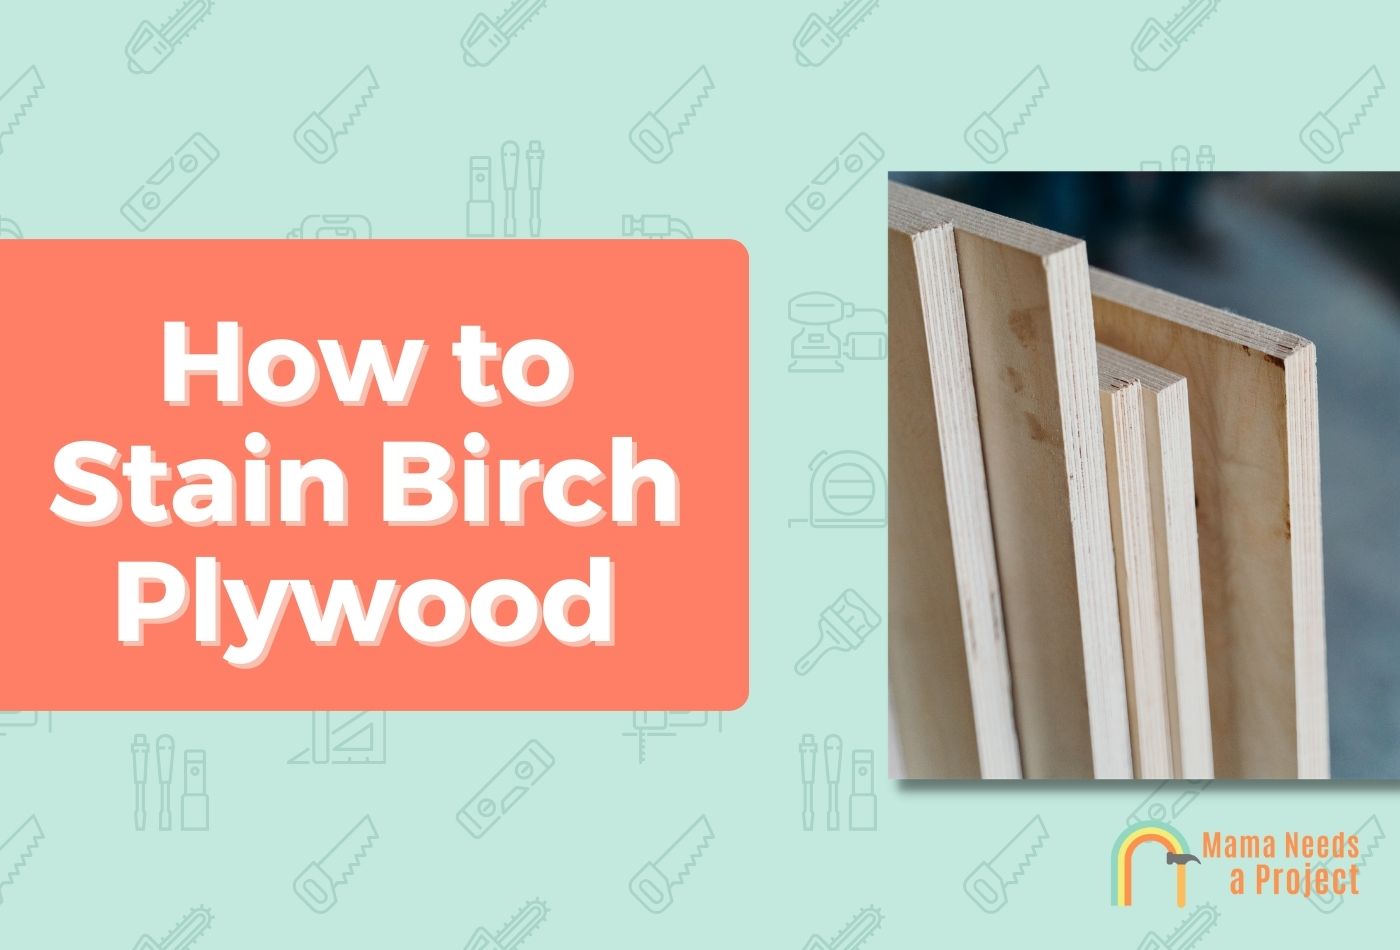 How to Stain Birch Plywood